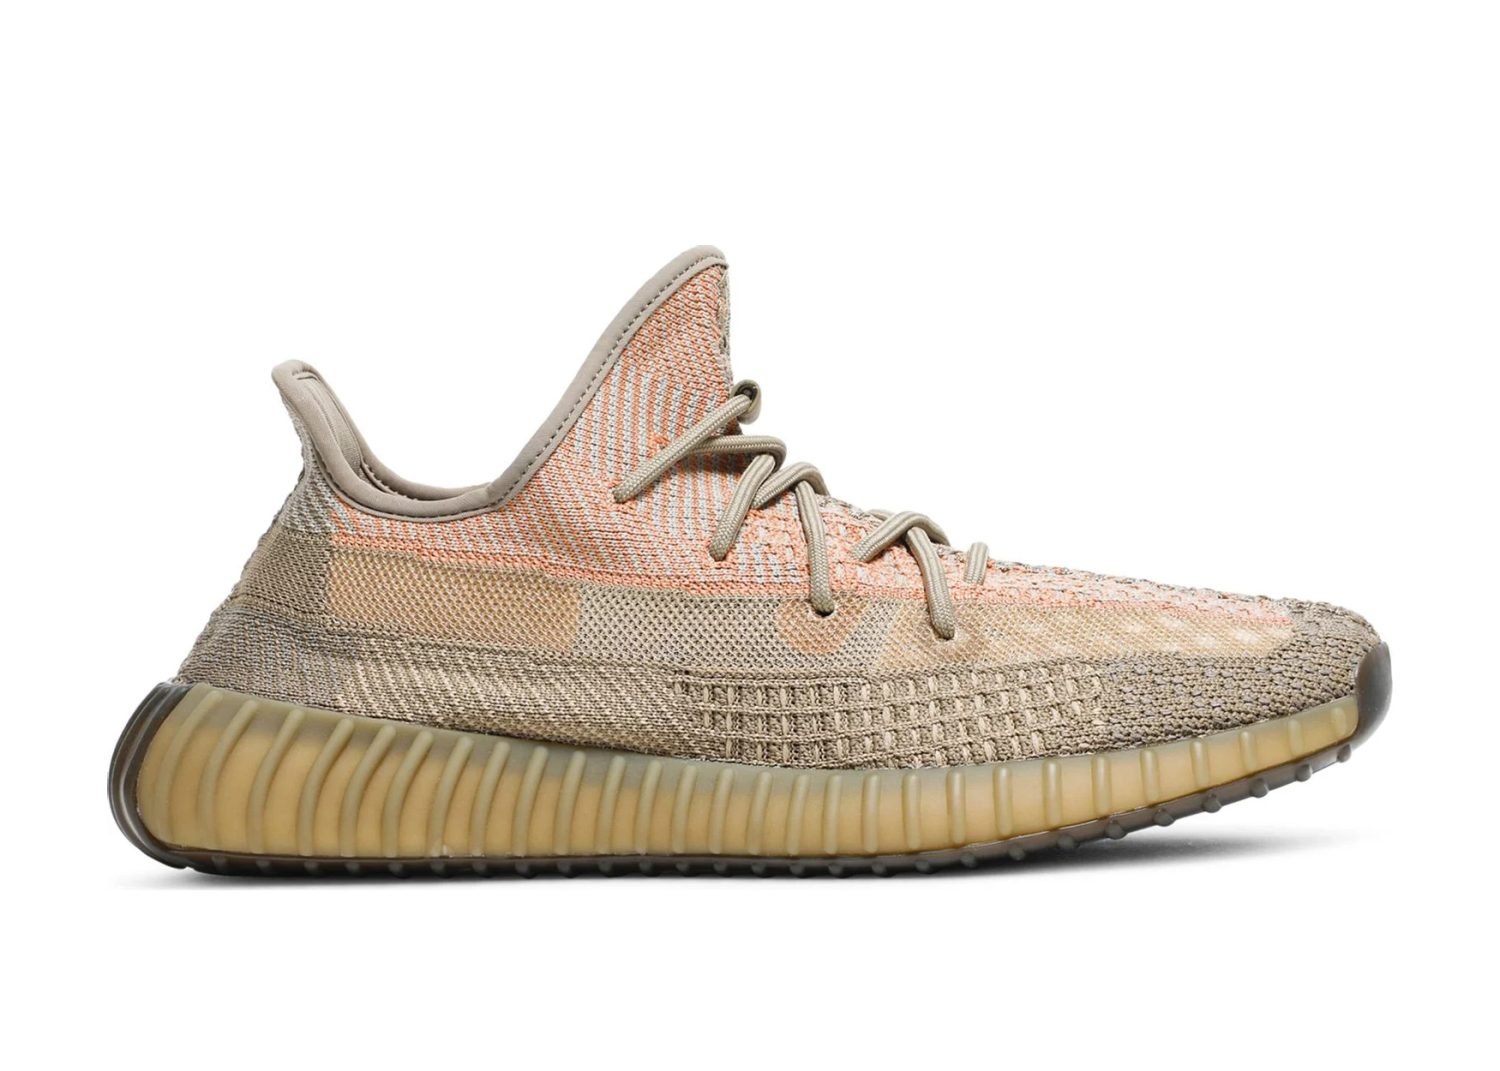 adidas yeezy boost 350 v2 sand taupe